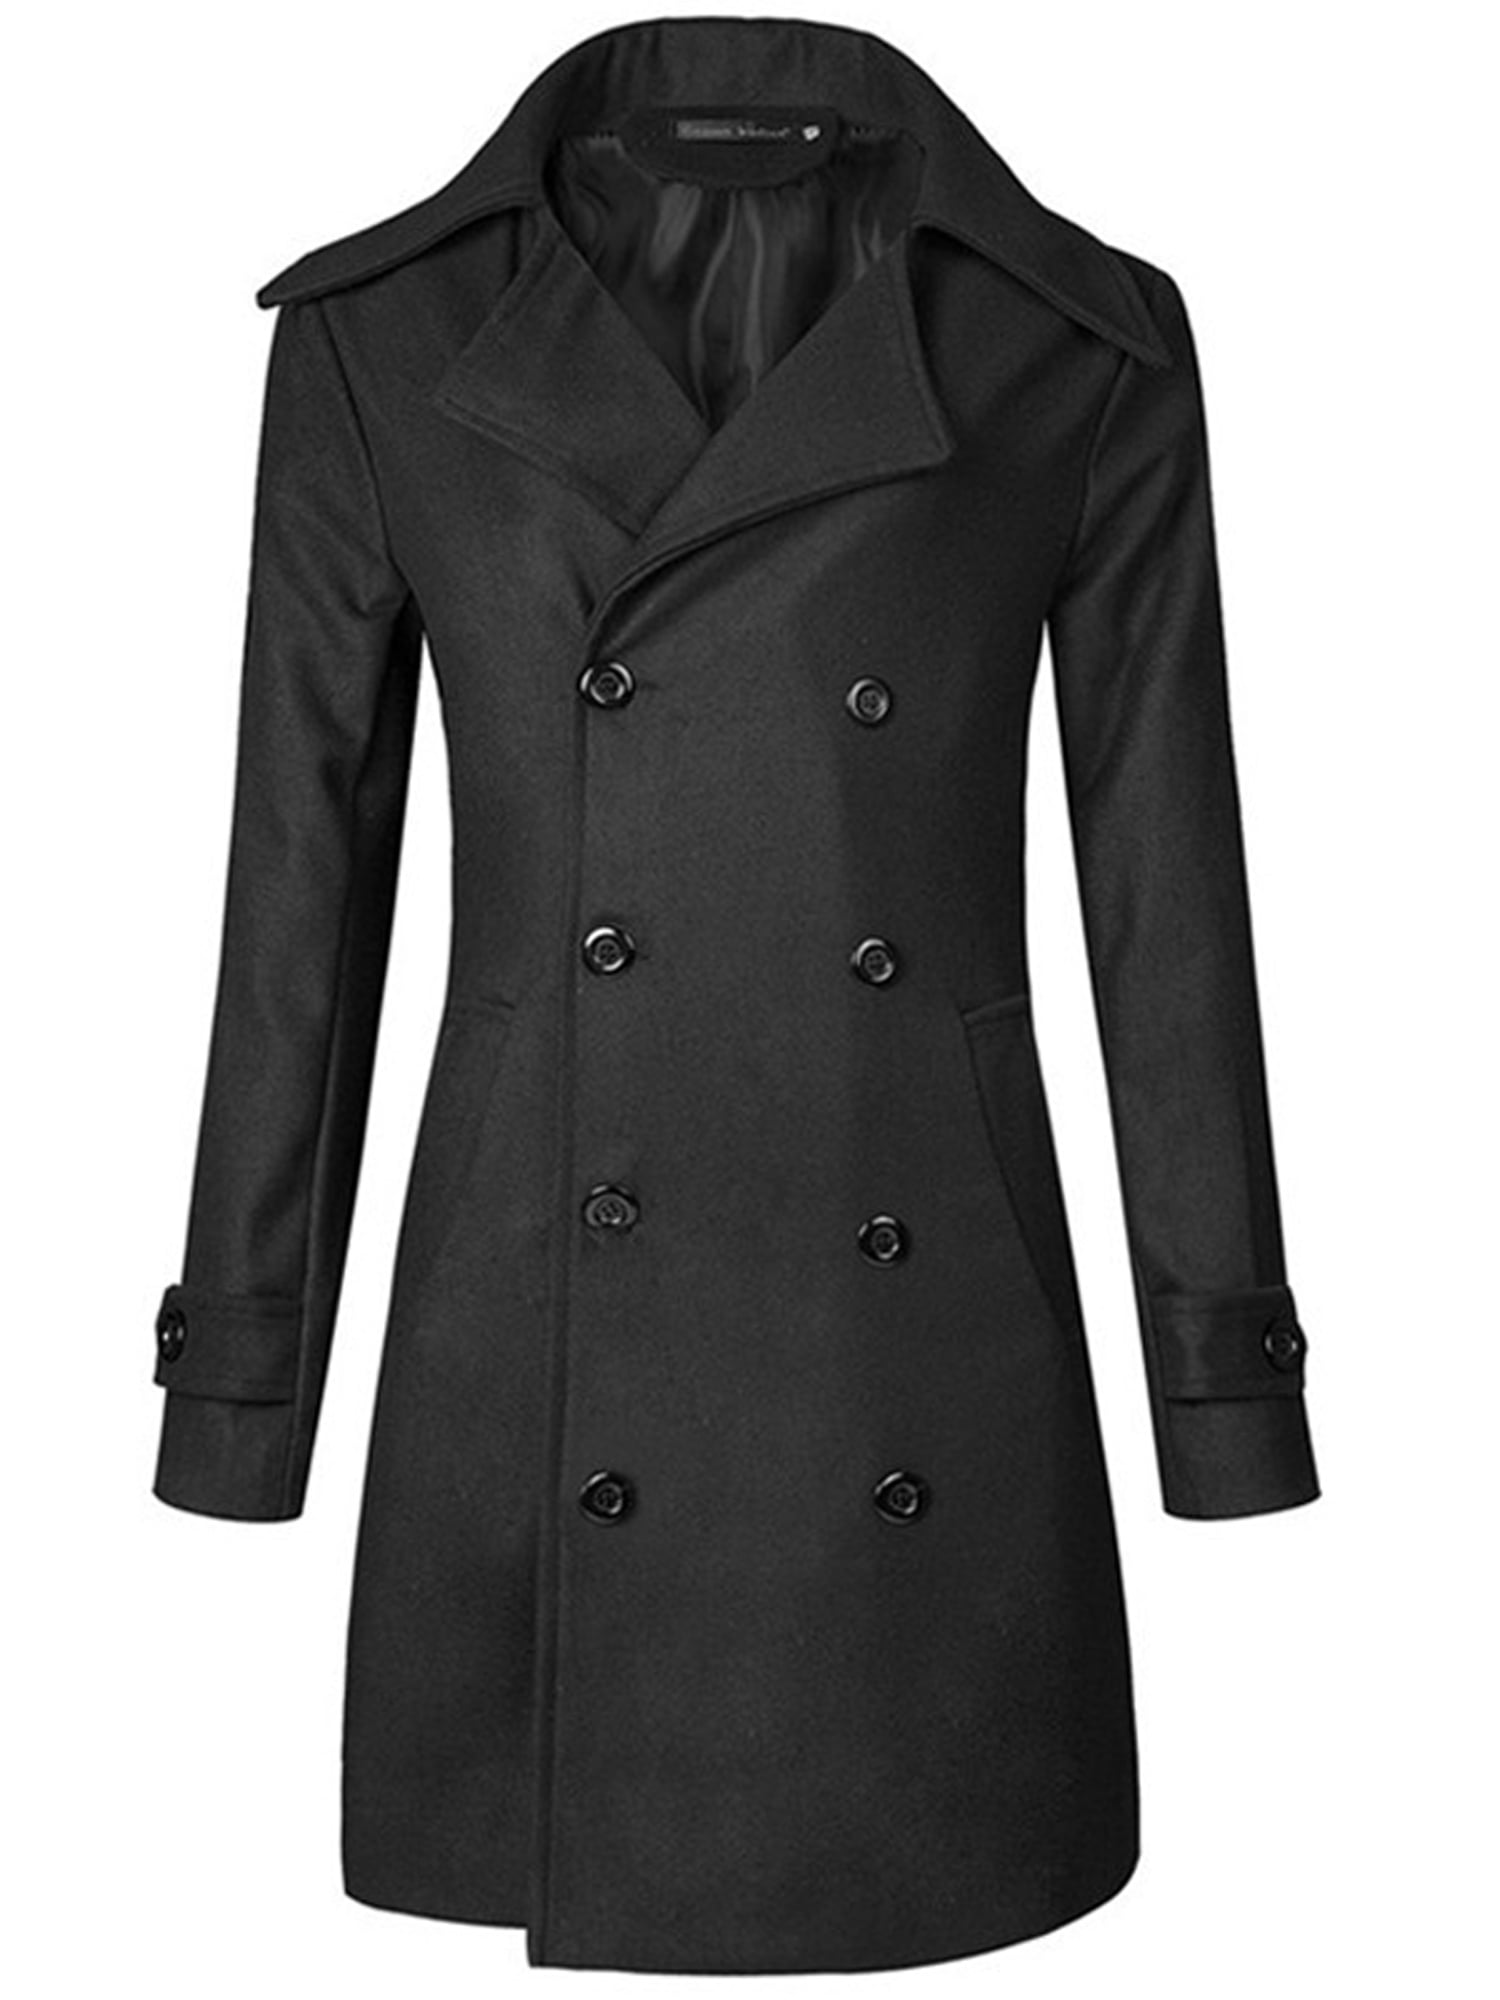 KaWaYi Mens Fashion Silm Fit Double-Breasted Lapel Simple Overcoat Trench Coat 